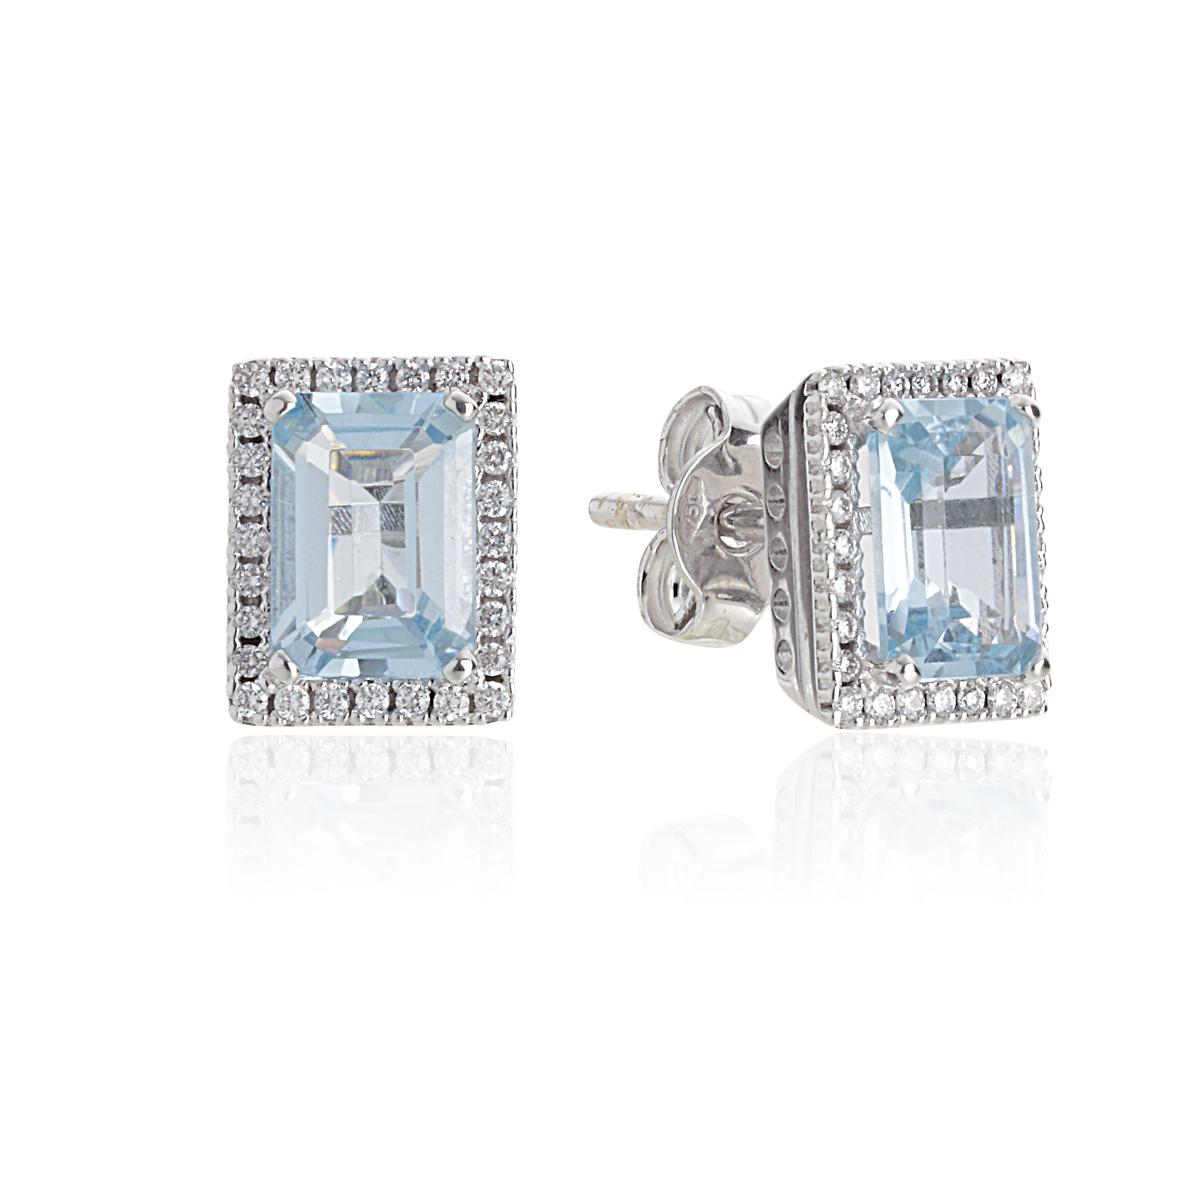 18 kt white gold earrings with aquamarine and diamonds - OD409/AC-LB